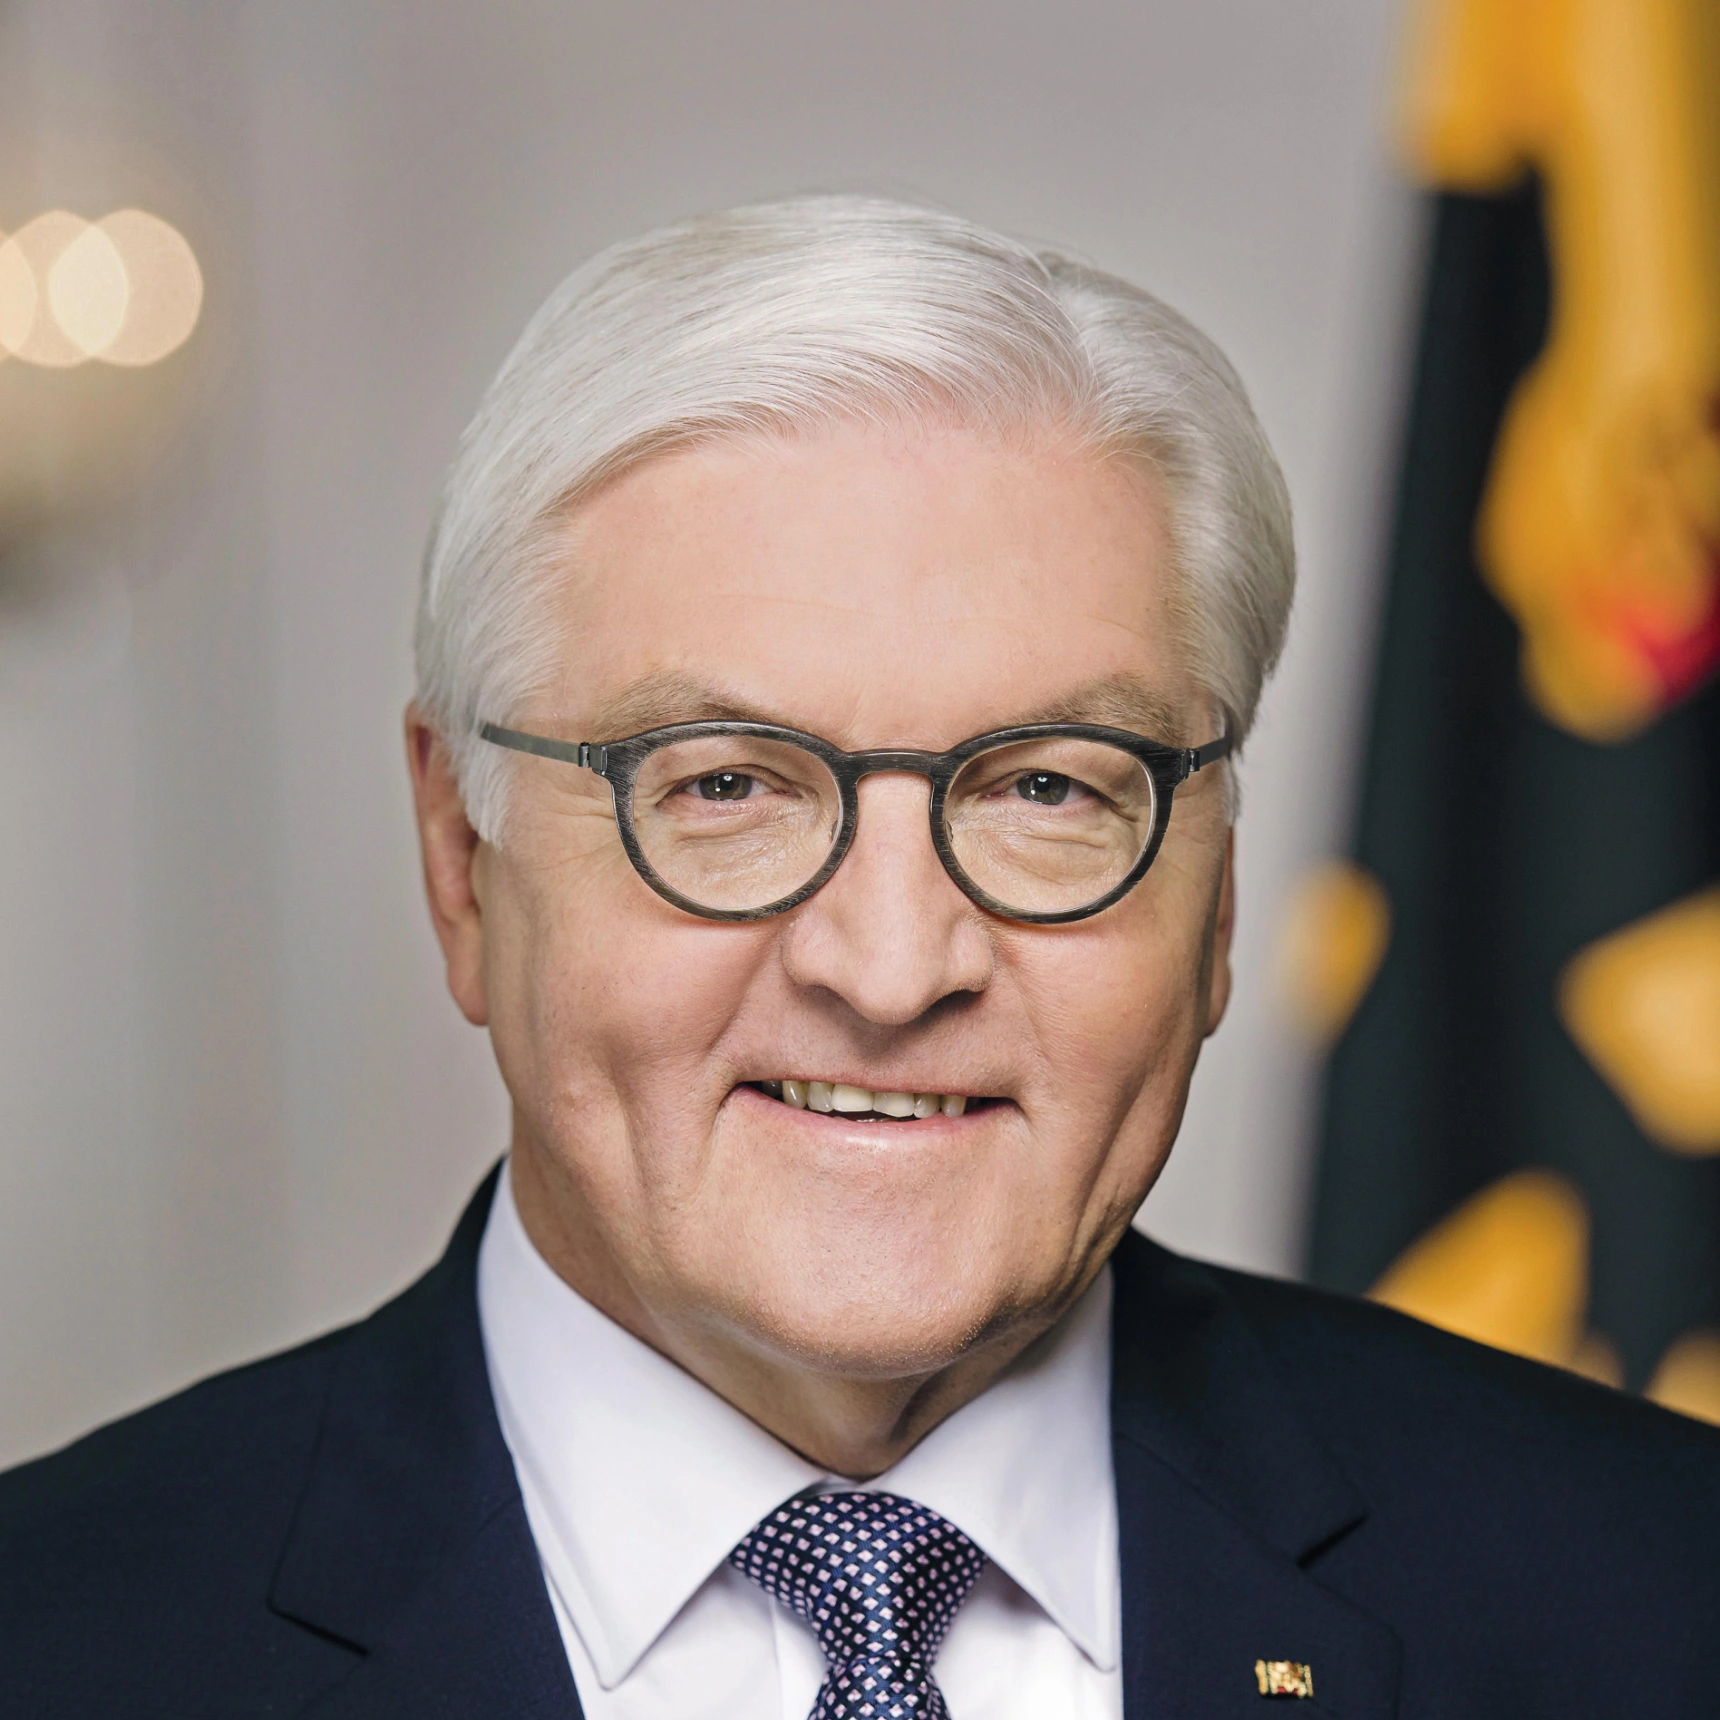 One picture shows an official portrait of Federal President FRank Walter Steinmeier at the "30 Years of German Unity" event.